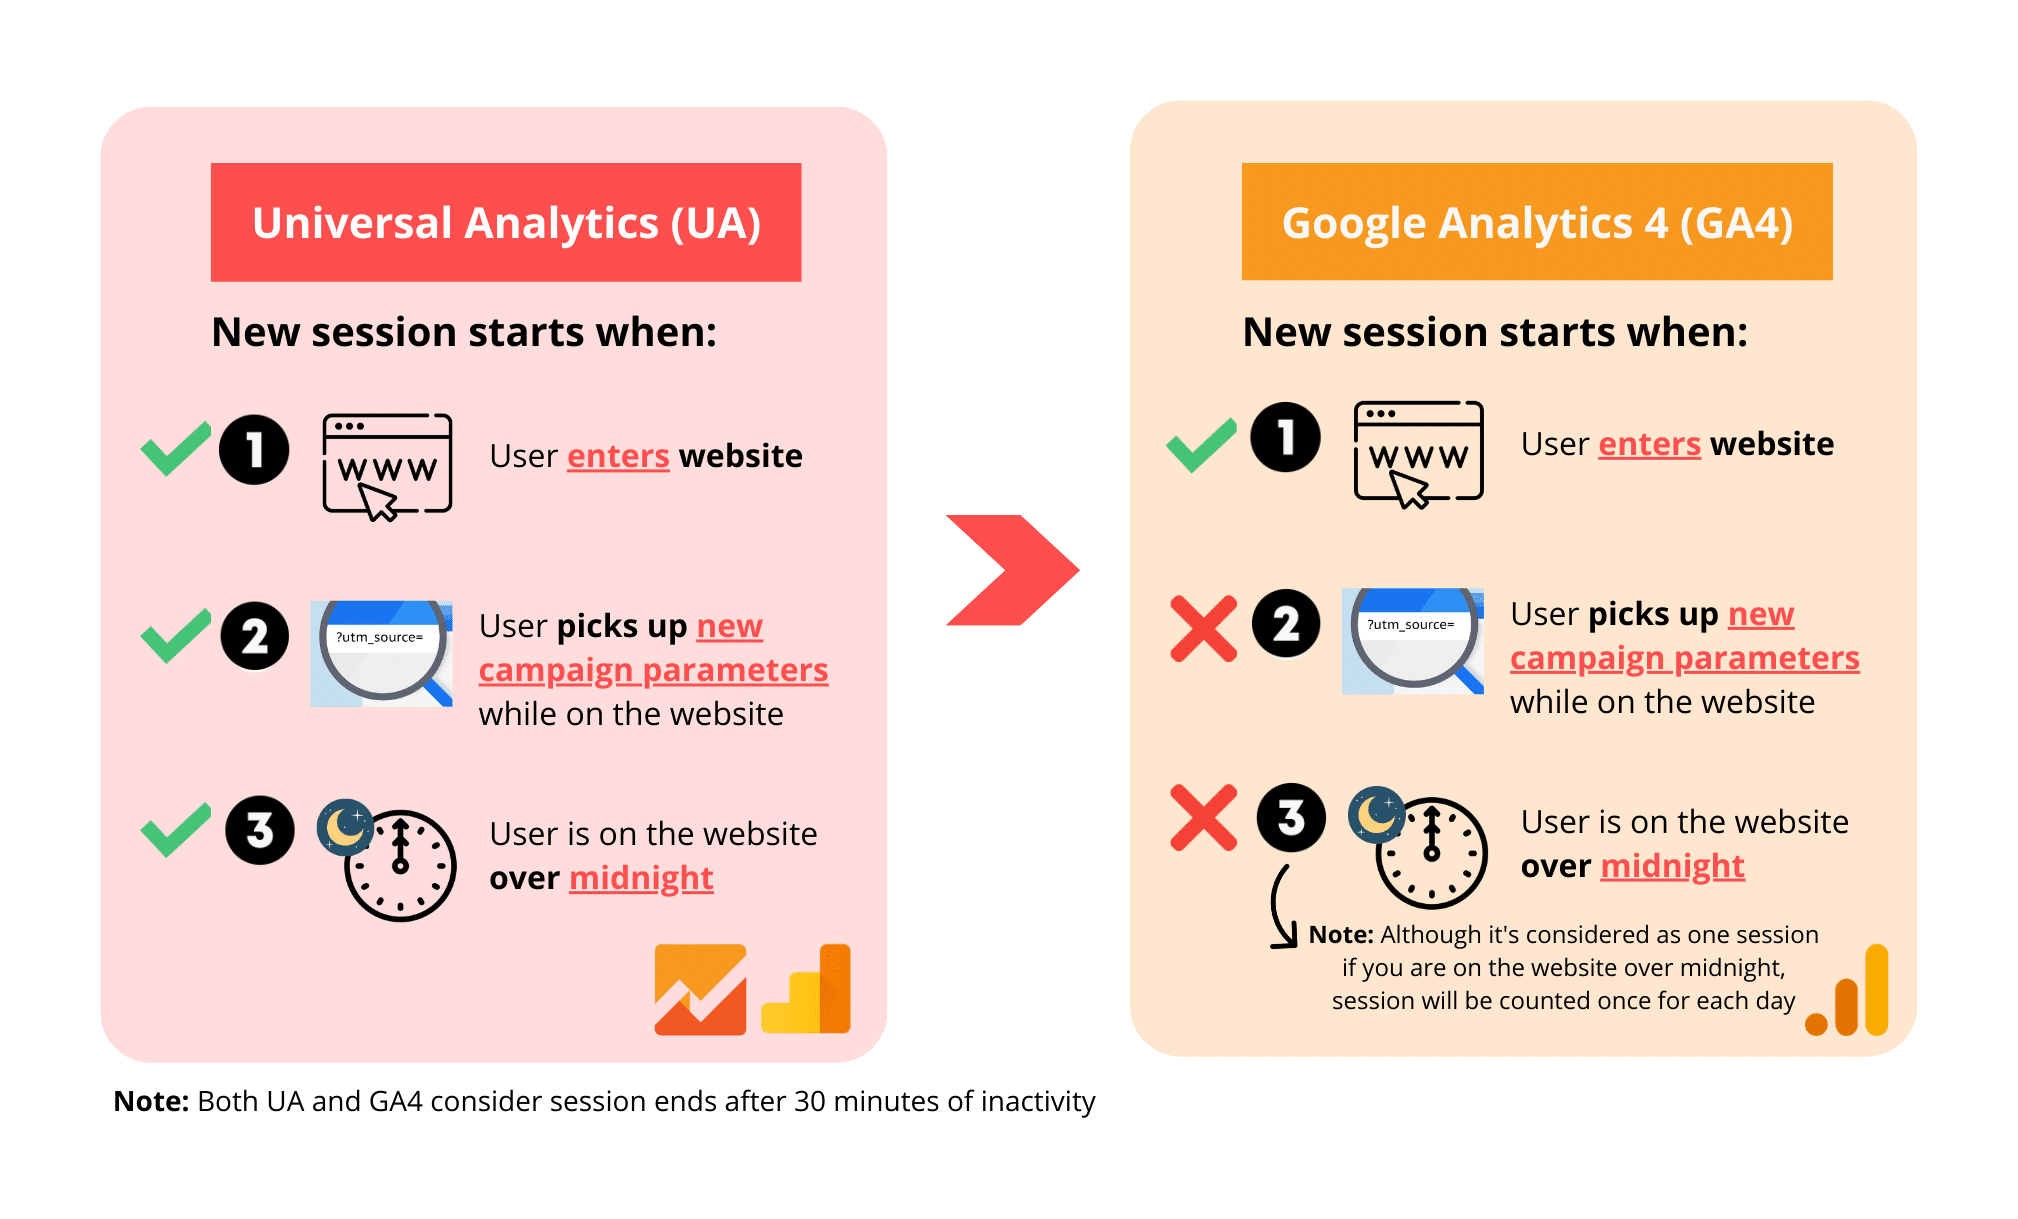 Reduced session count after migrating from Universal Analytics to Google Analytics 4.